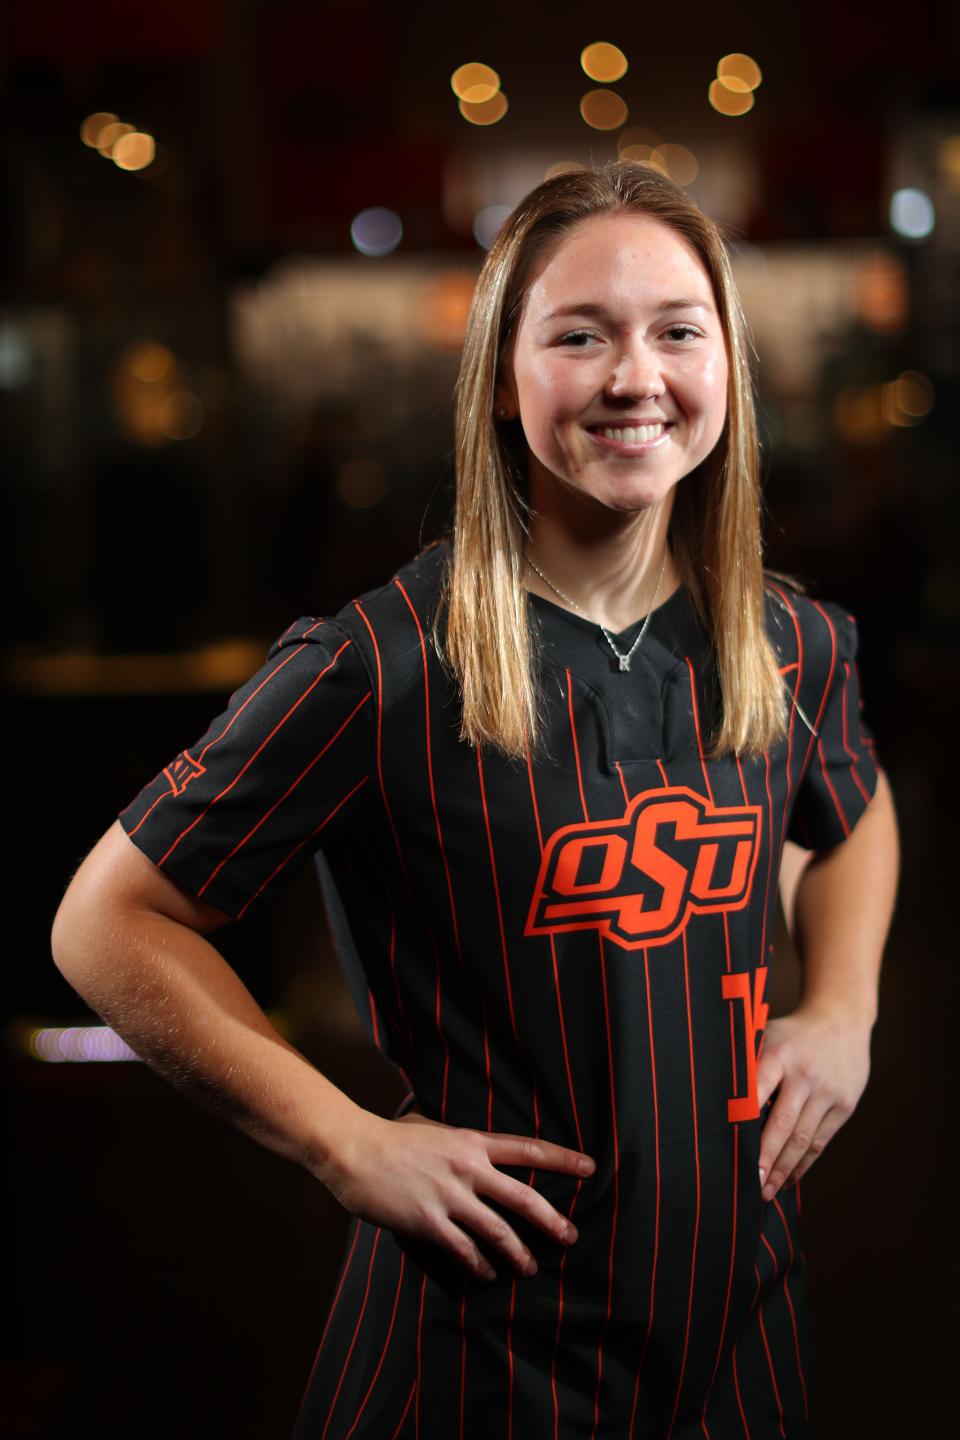 New Oklahoma State leadoff hitter Rachel Becker is batting .579 with a .673 on-base percentage through her first 14 games as a Cowgirl.